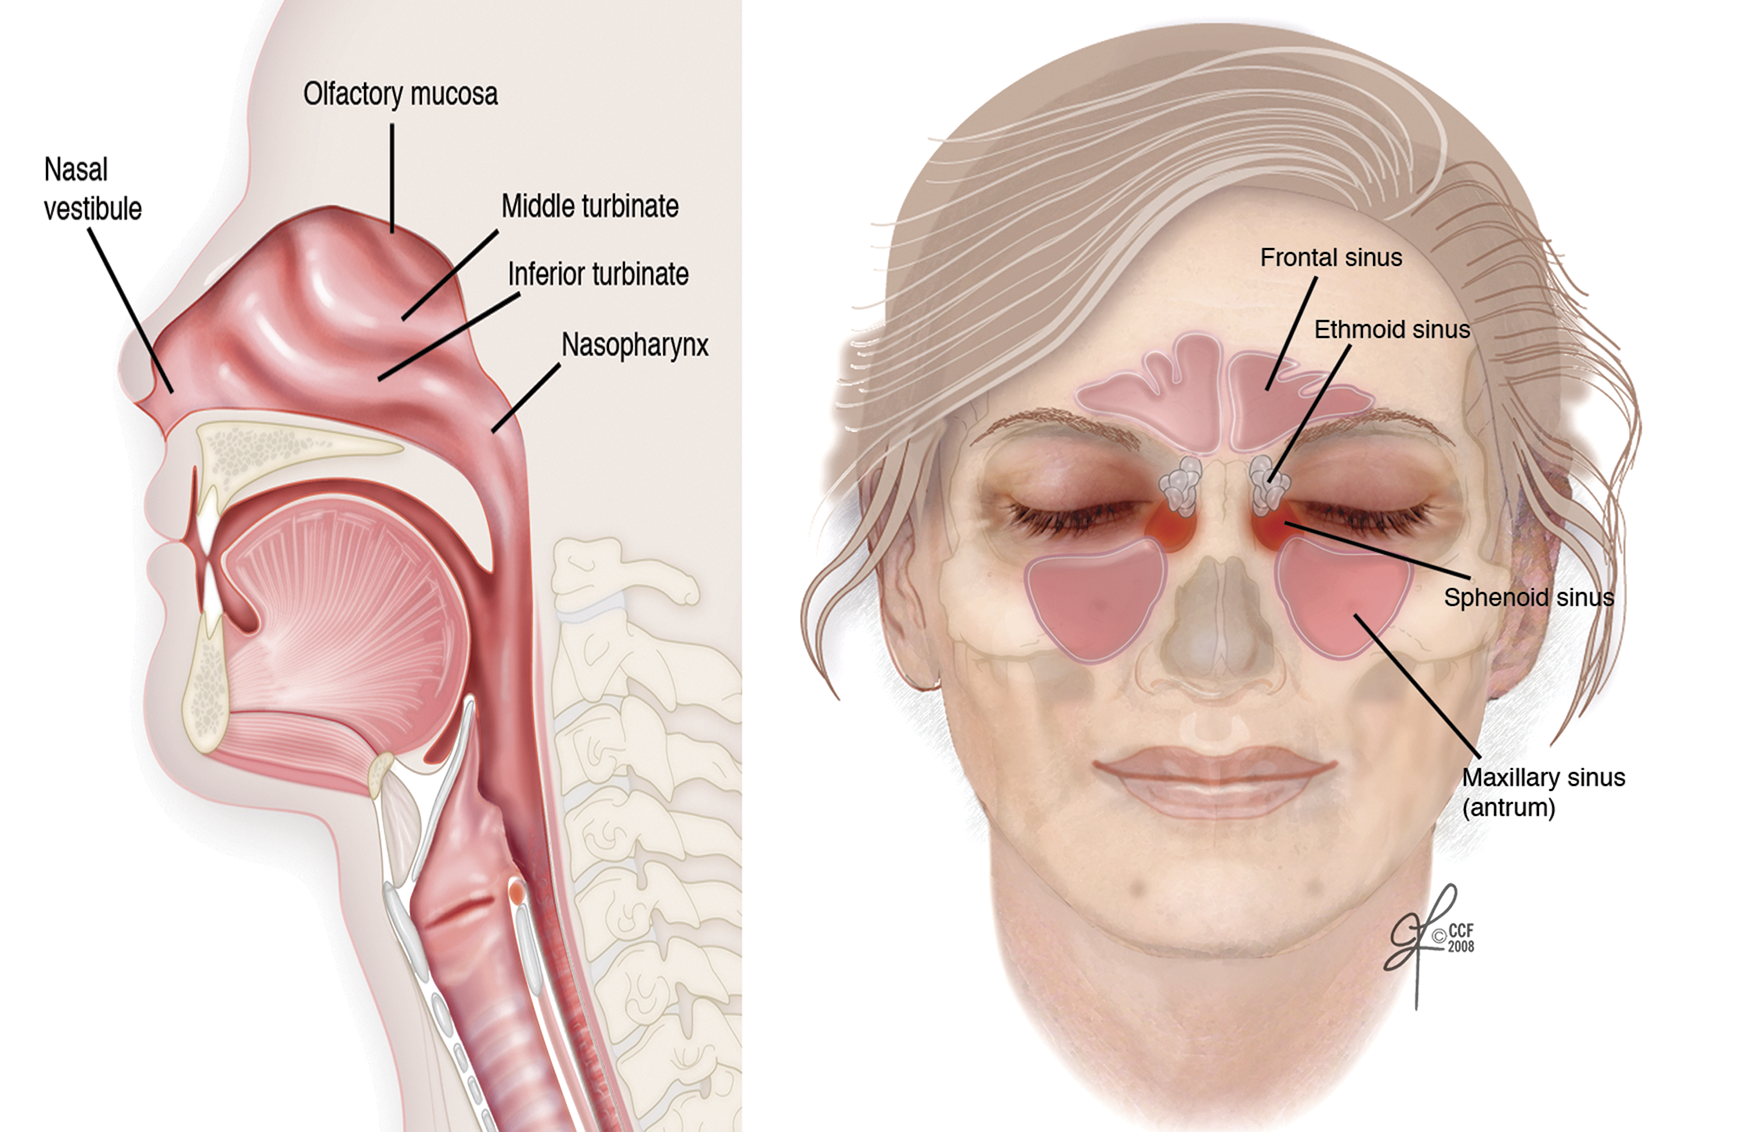 Hpv and nasal cancer